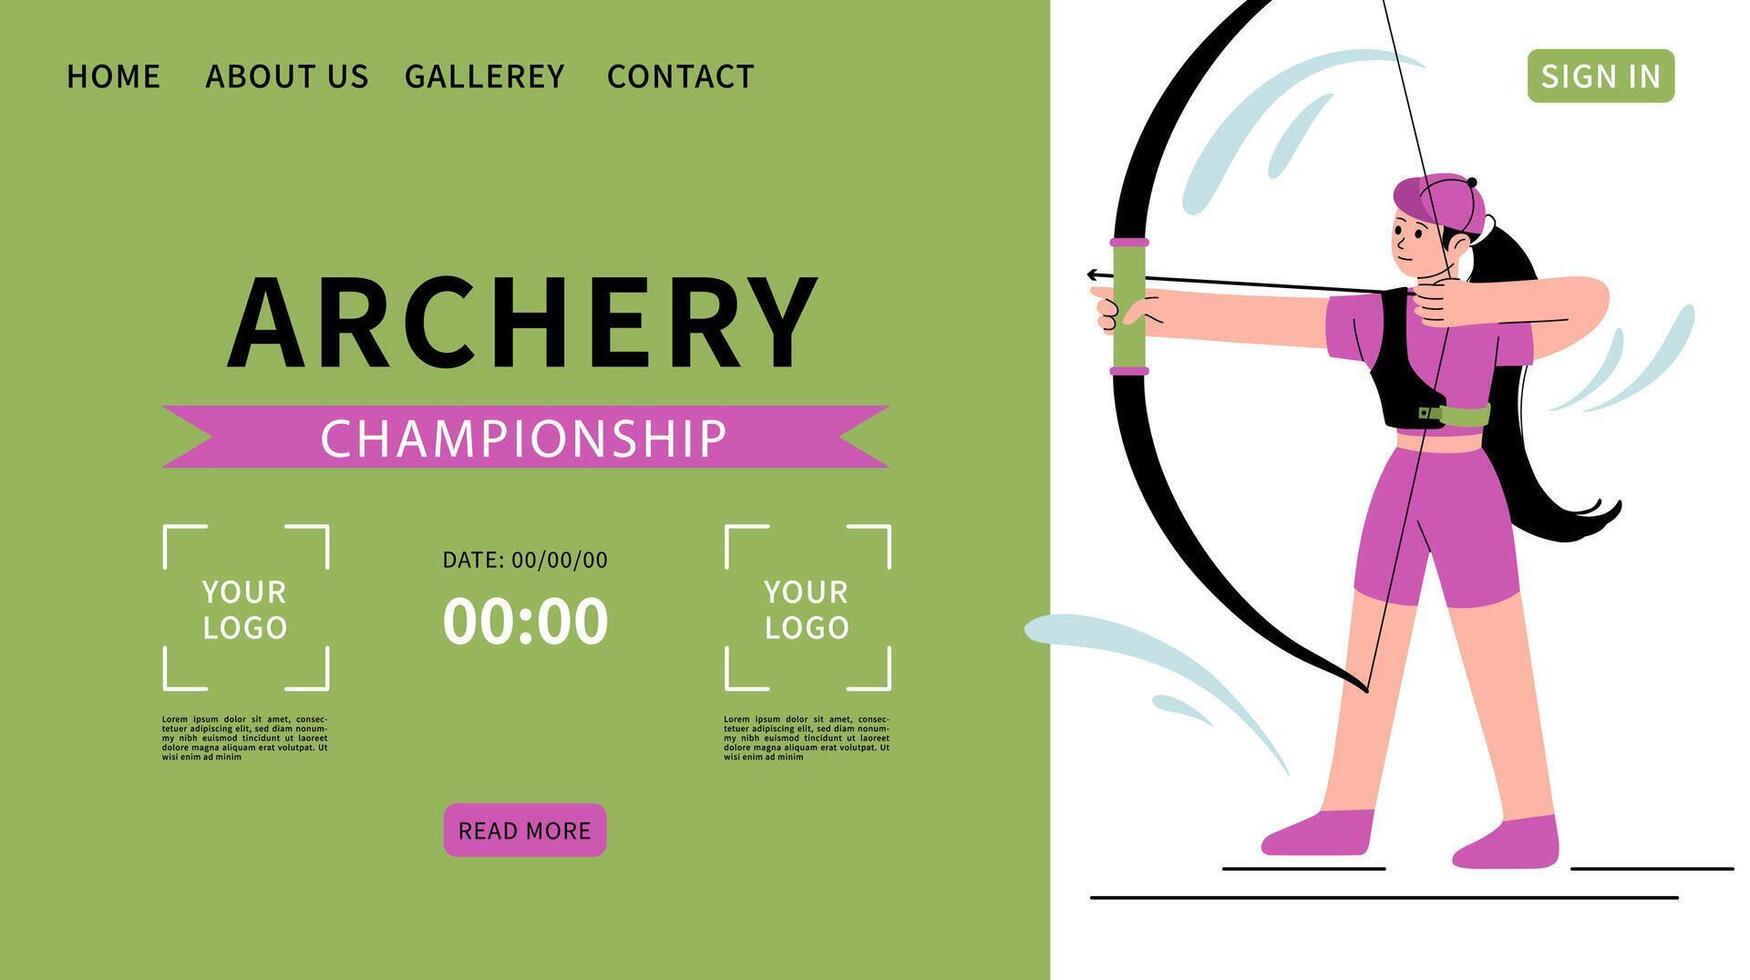 Archery championship web banner. Woman shoots bow. Background for sports standings. Website for sports competitions. Target hit. Woman athlete. Text templates. Vector flat illustration.